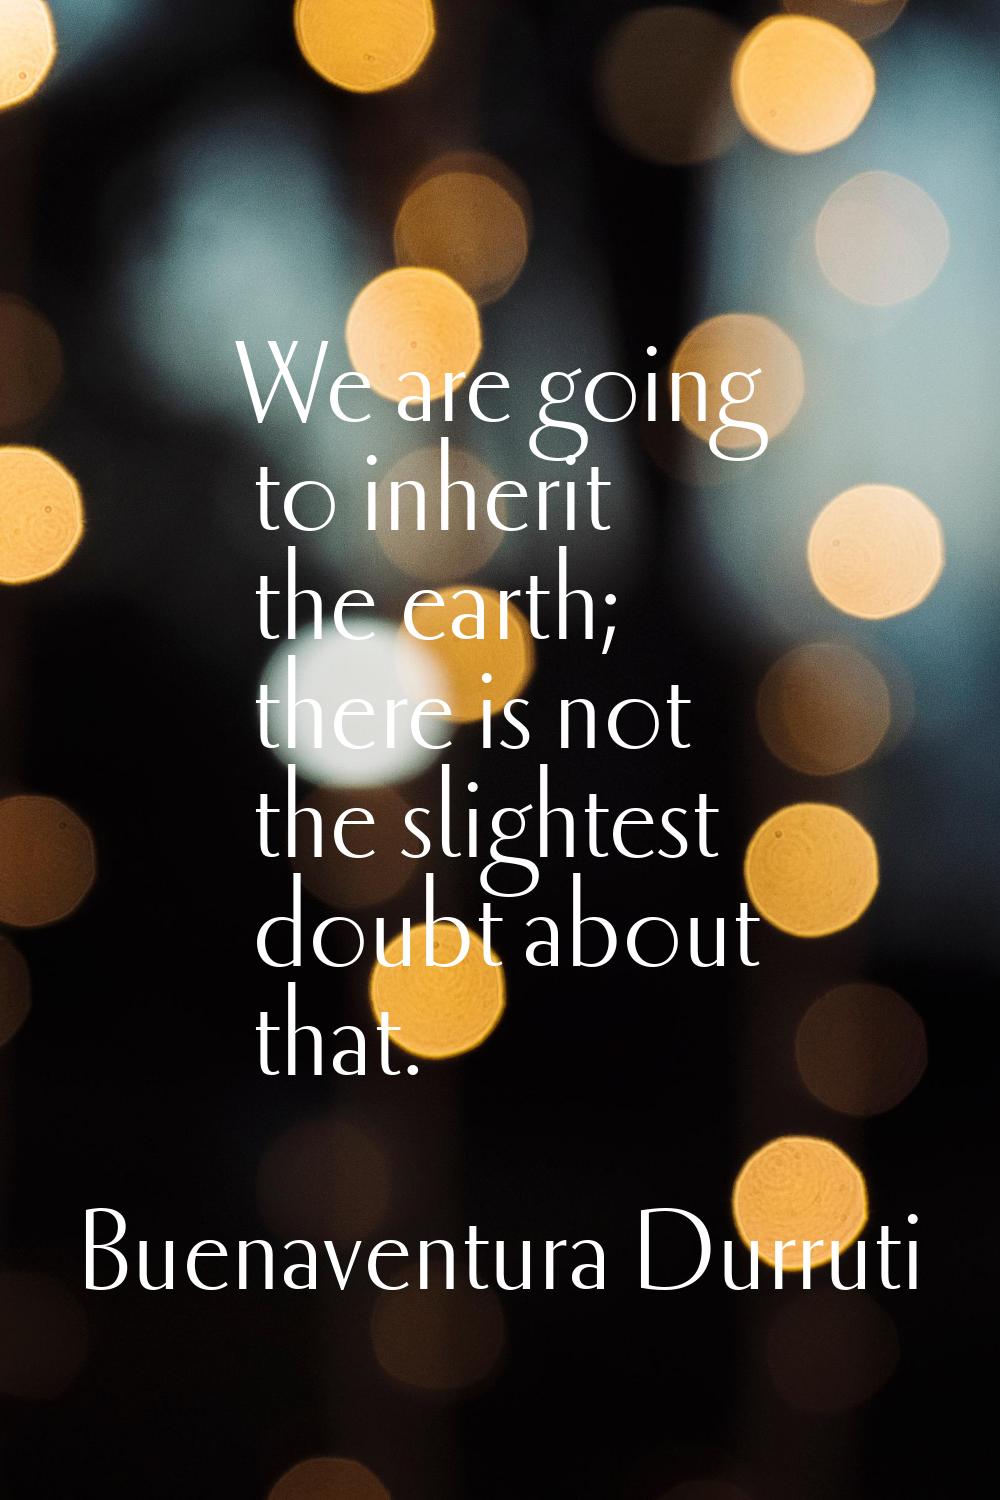 We are going to inherit the earth; there is not the slightest doubt about that.